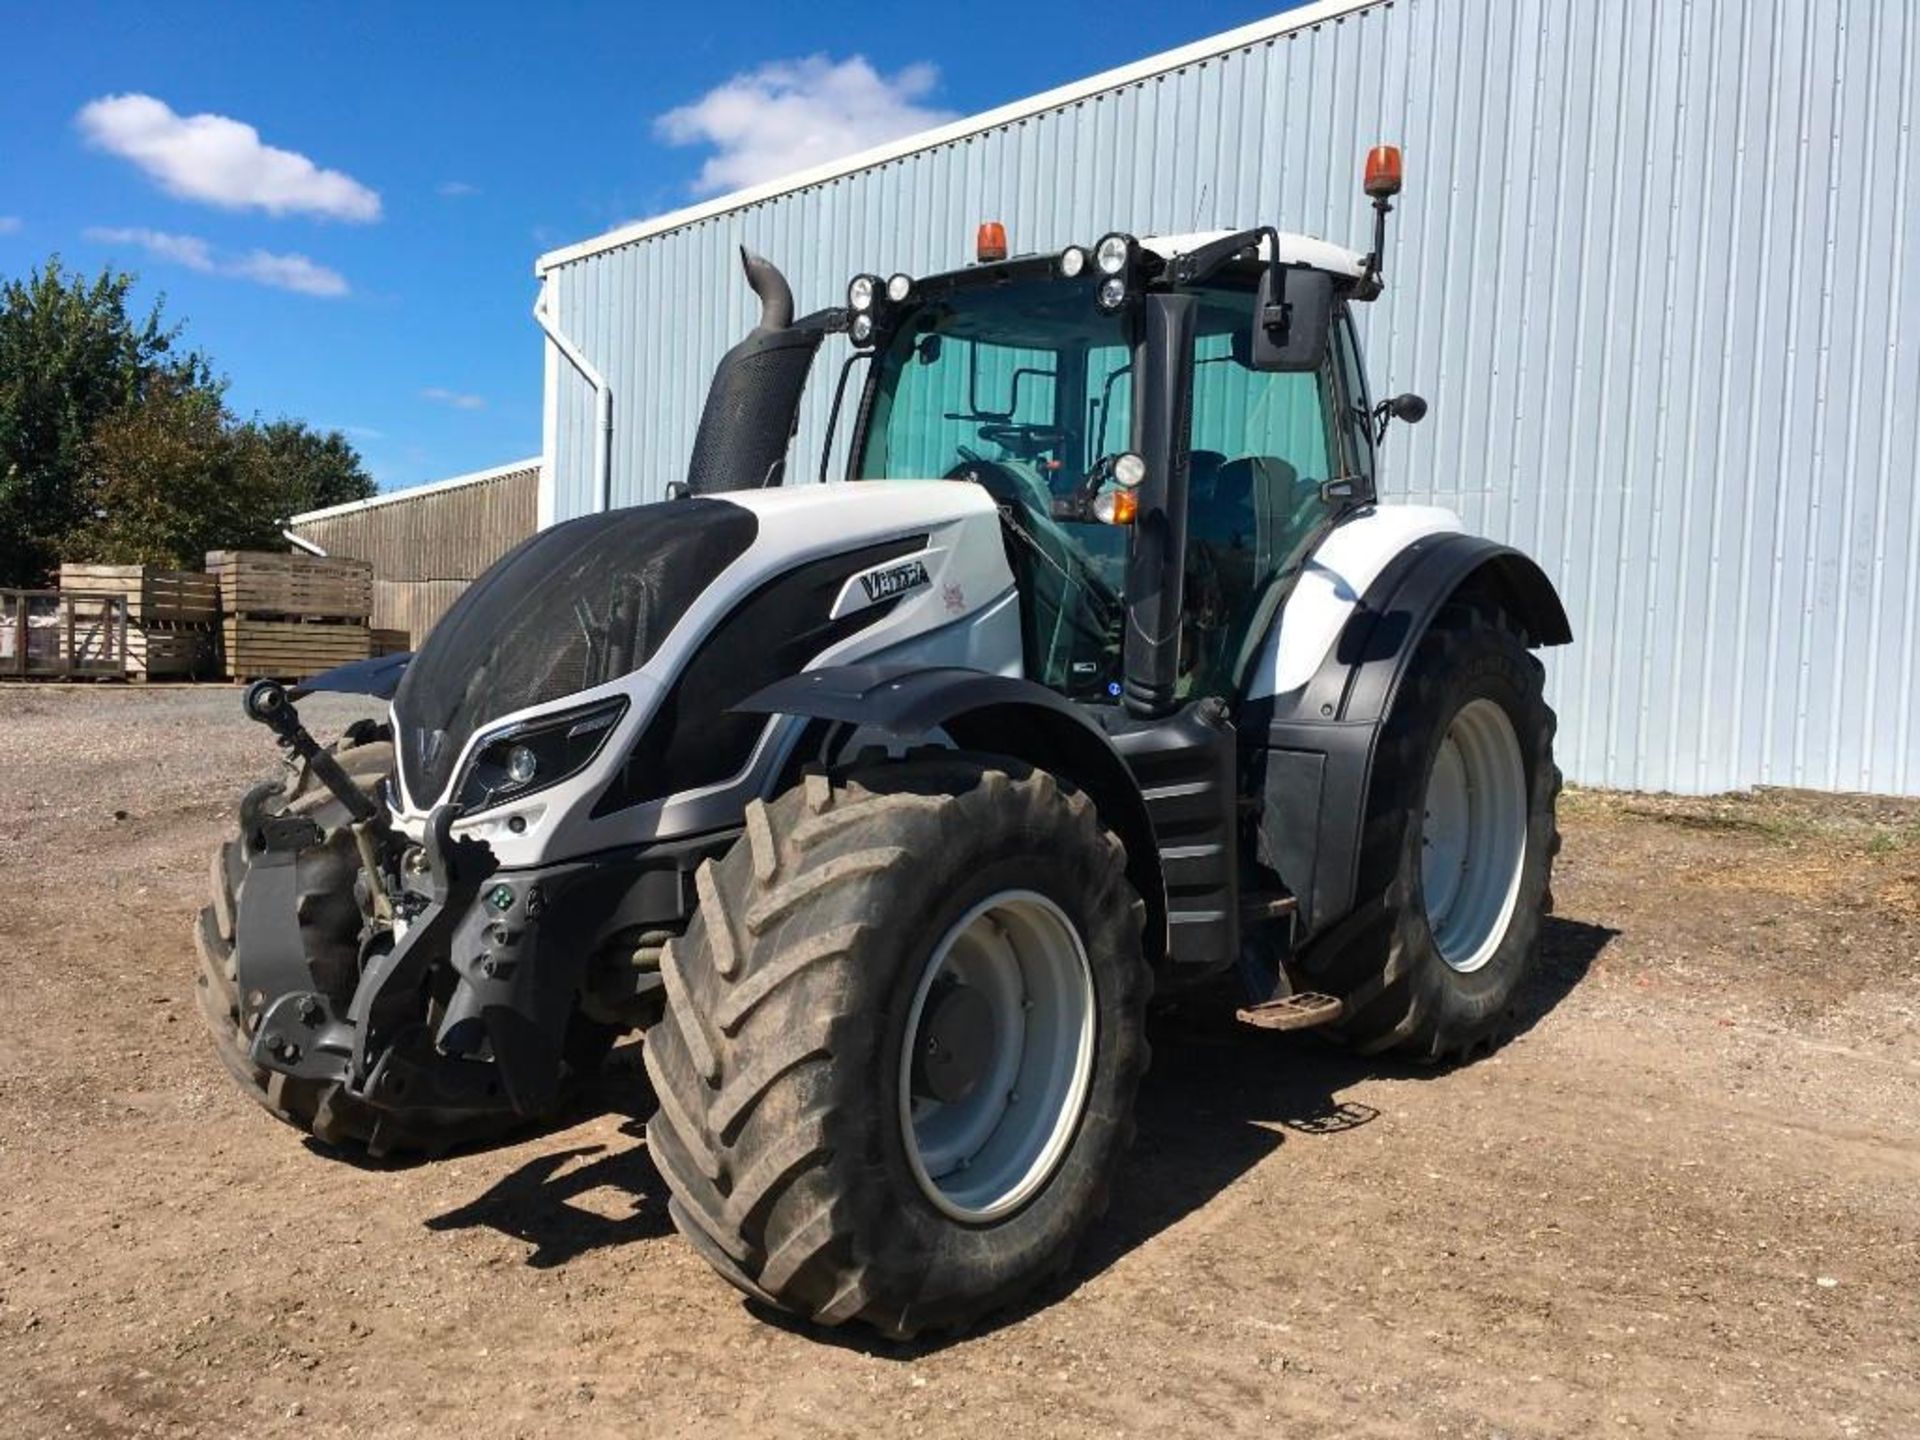 2015 Valtra T174 Versu 50kph tractor, powershift transmission, air suspension, 2 front and 4 rear sp - Image 5 of 15